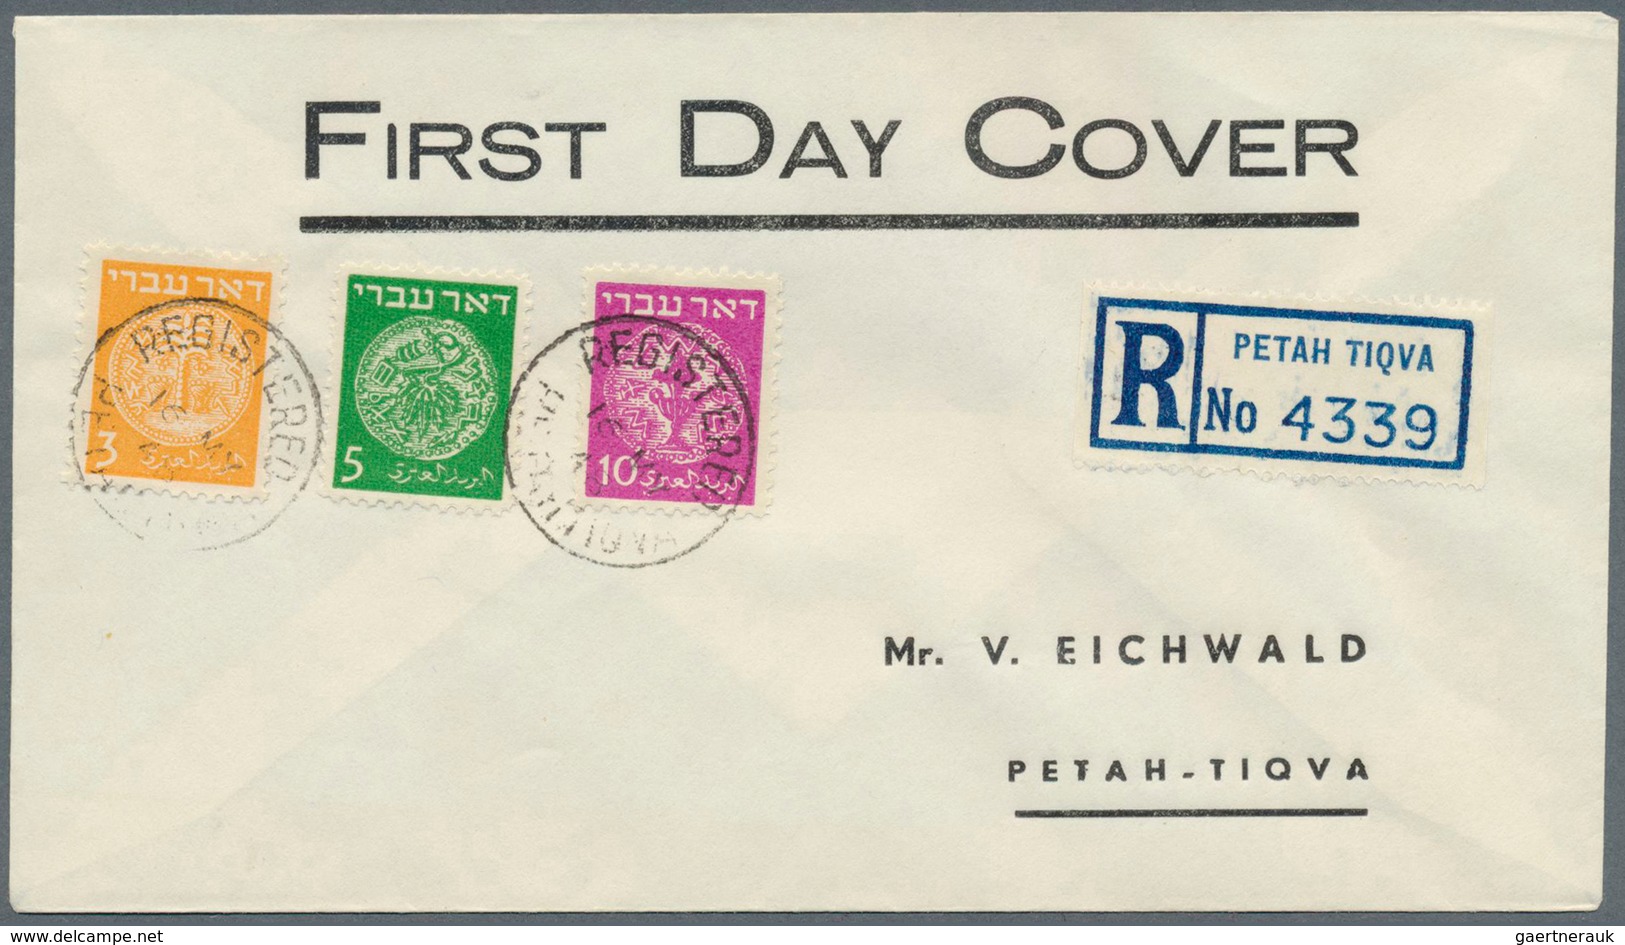 22849 Israel: 1948/1965, holding of apprx. 280 entires with commercial mail and philatelic covers, main va